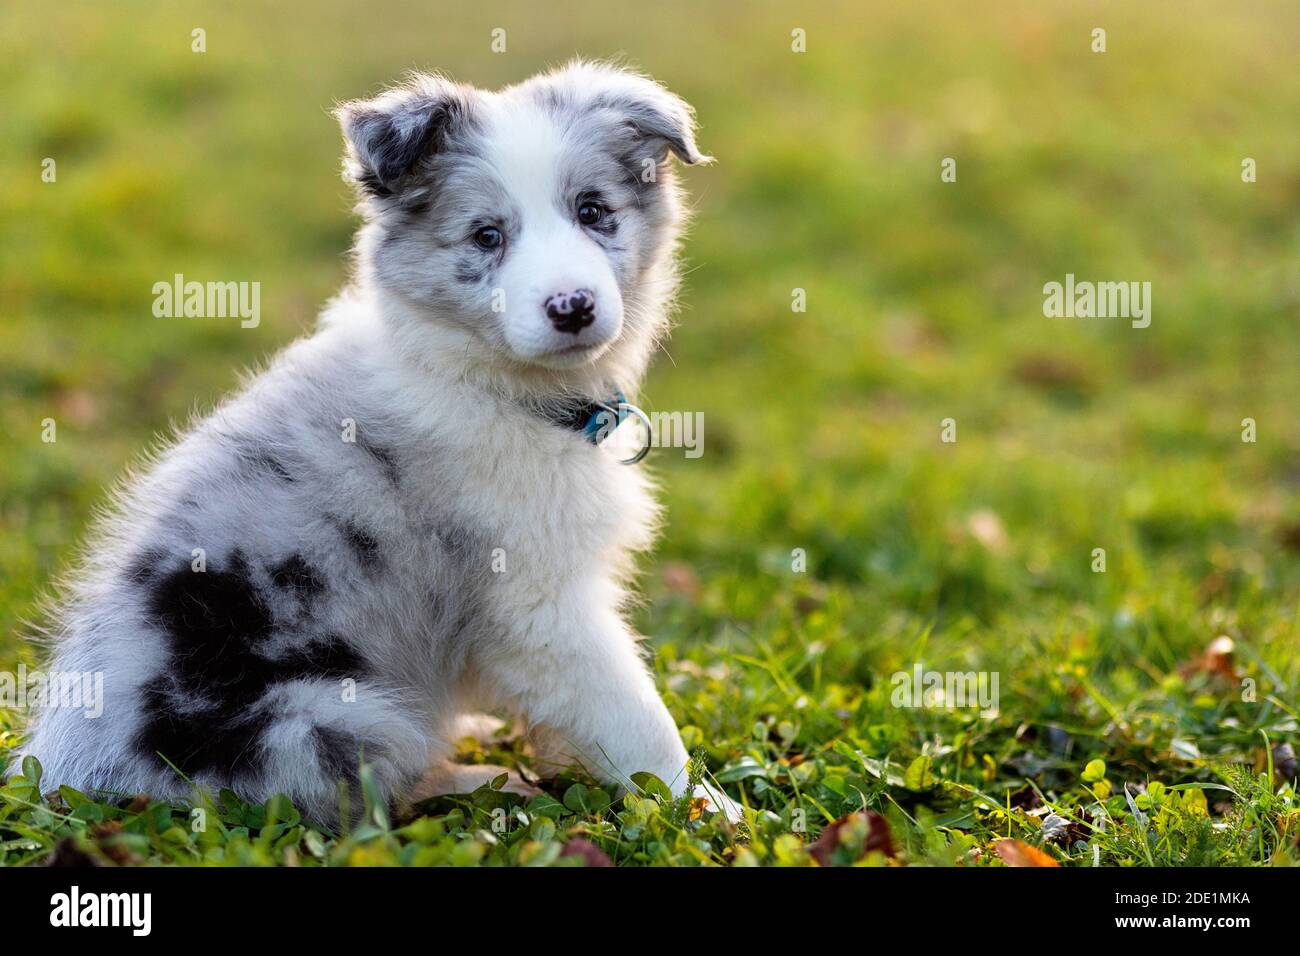 Blue merle border collie puppy sitting on the grass Stock Photo - Alamy